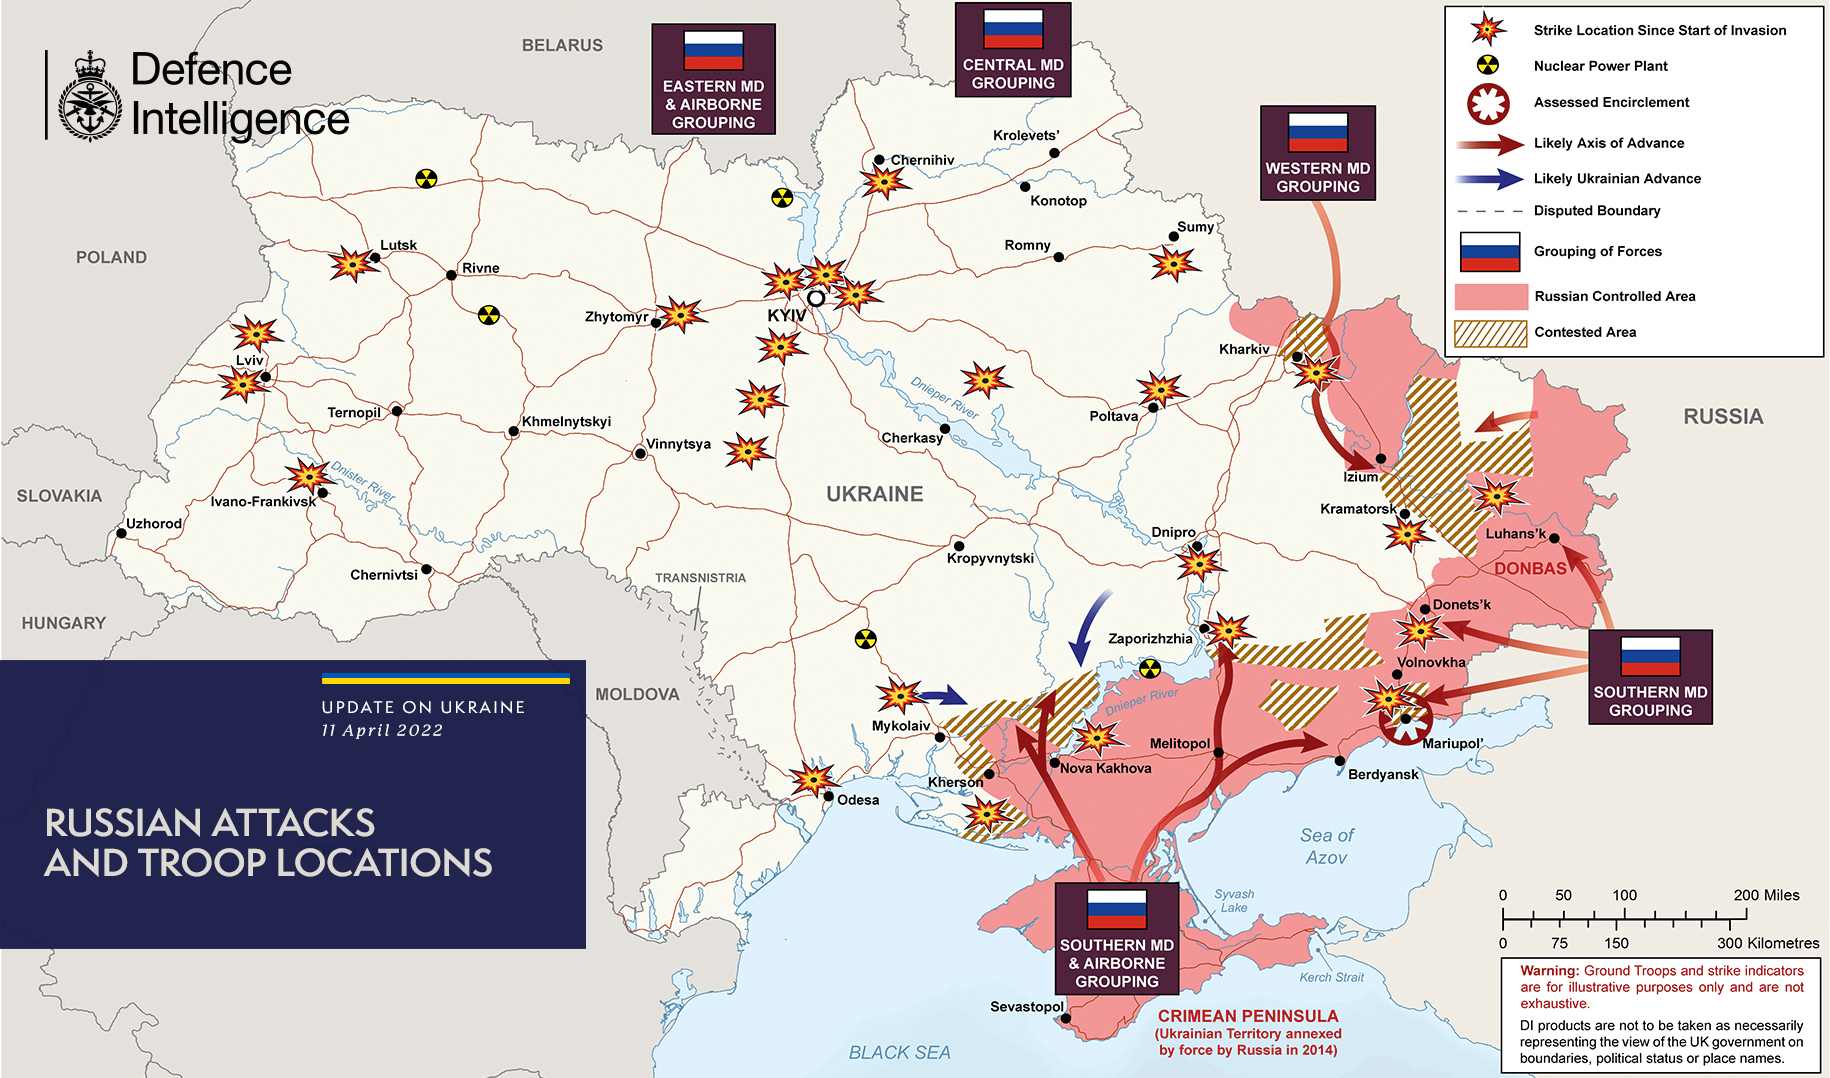 Russian attacks and troop locations map 11/04/22